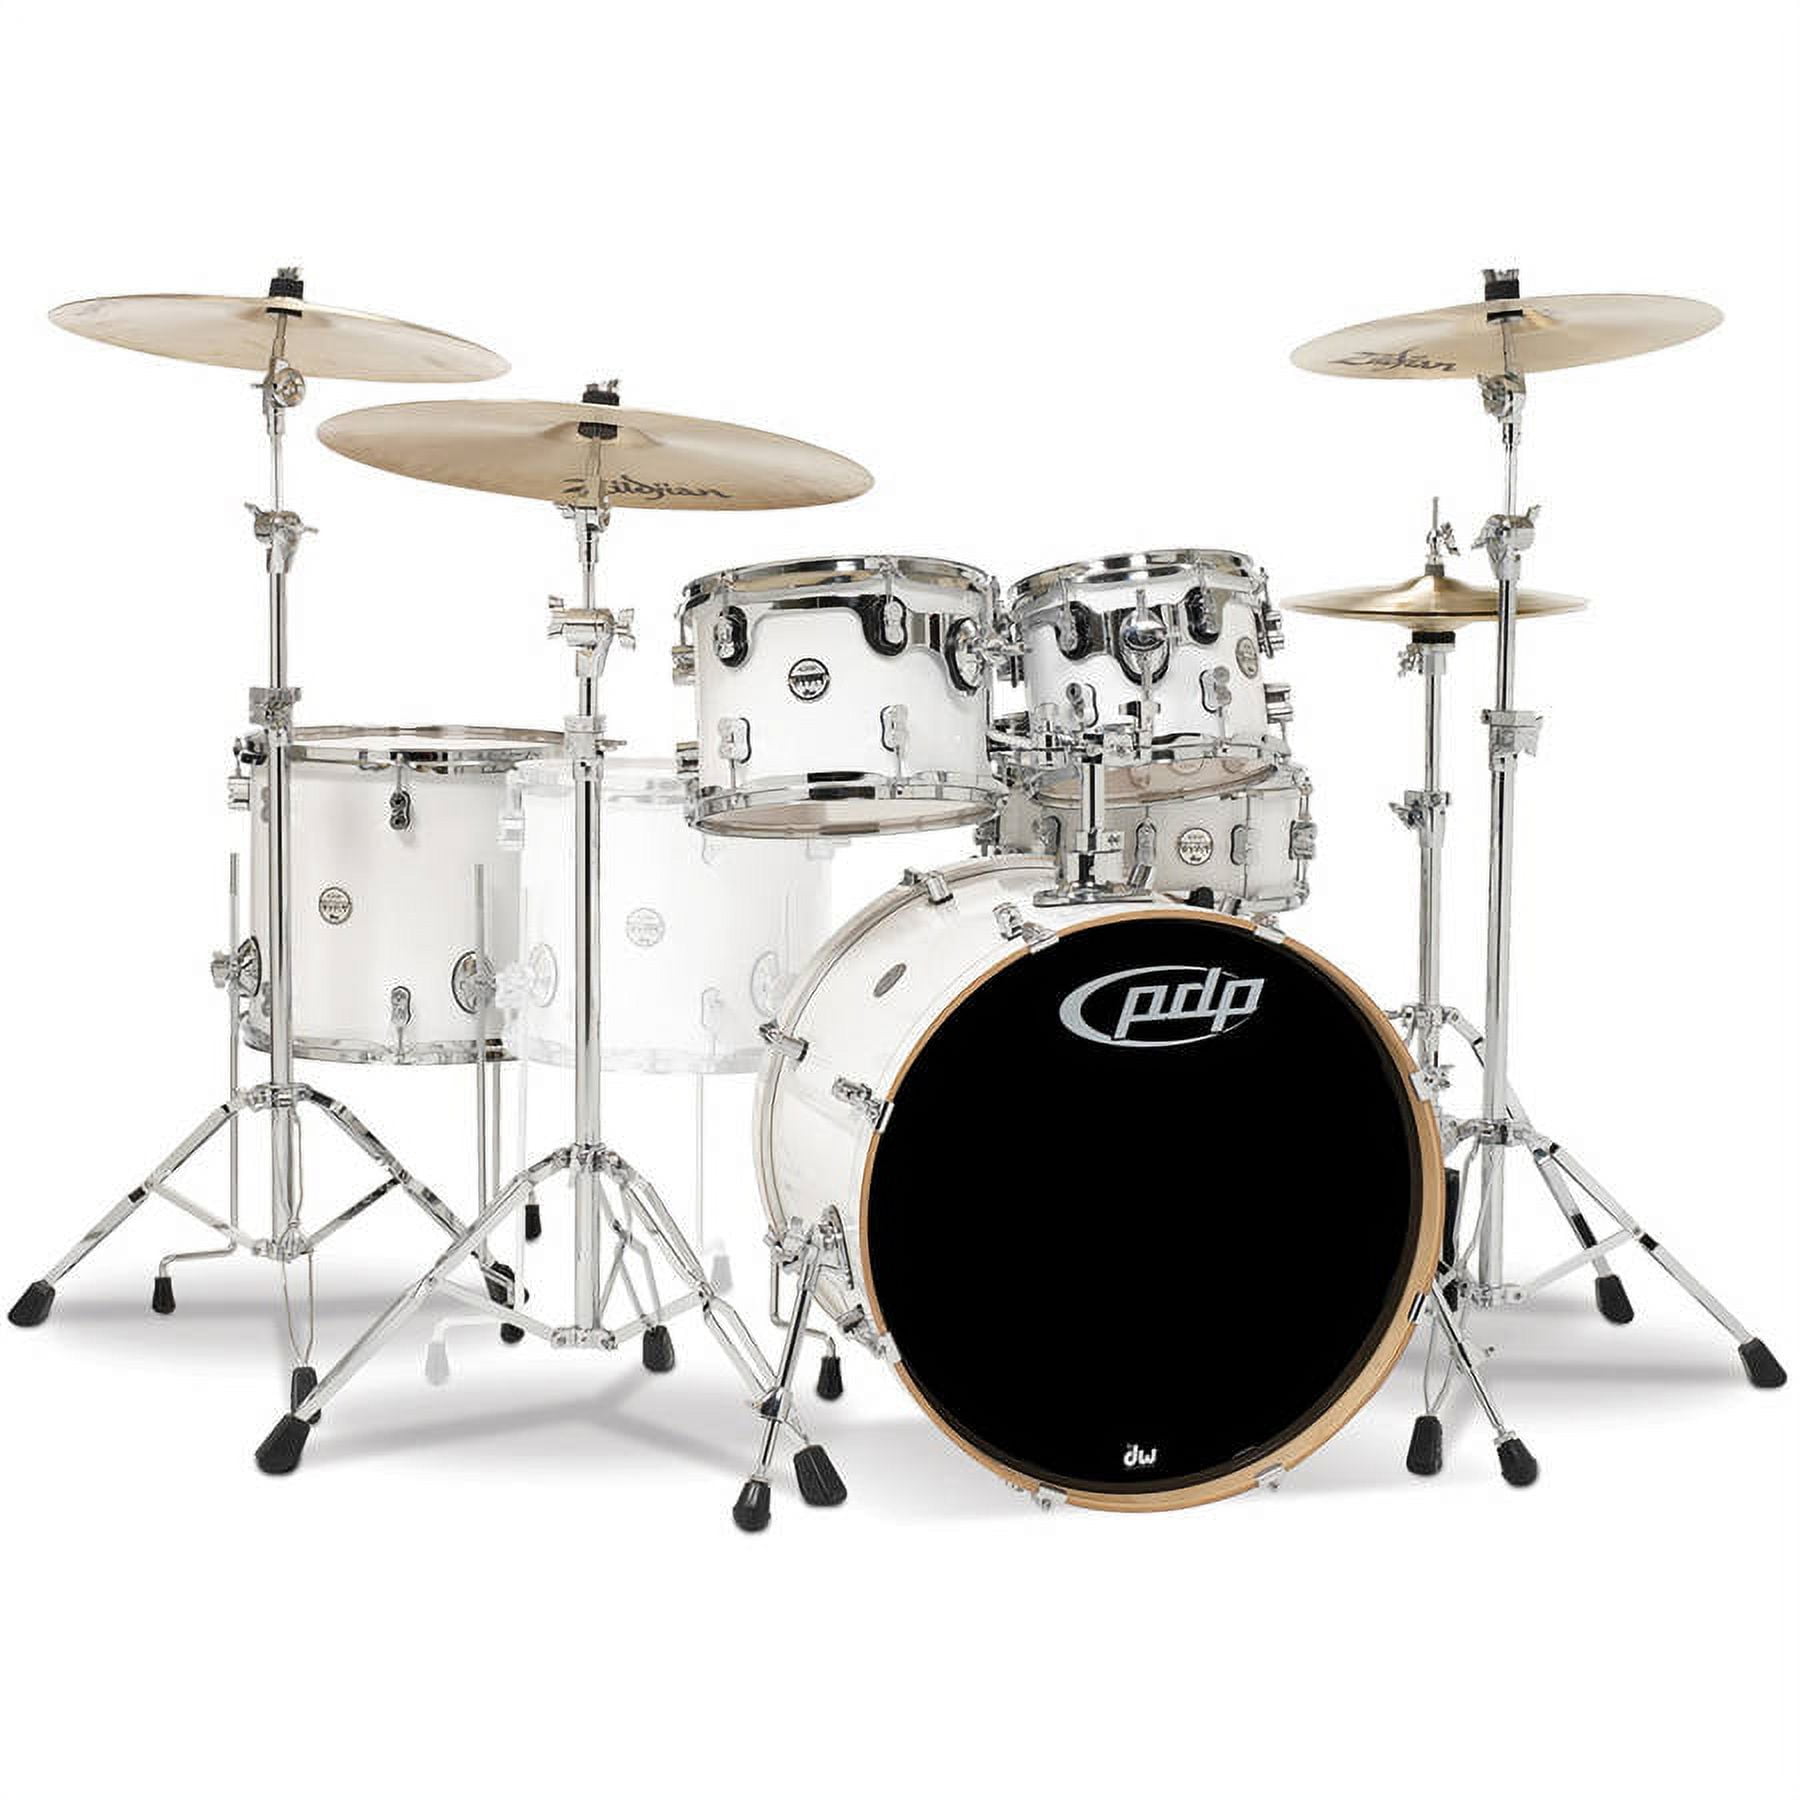 PDCM2215PW Pearlescent White Chrome Hardware Kit Drums, 5 Piece -  PDP